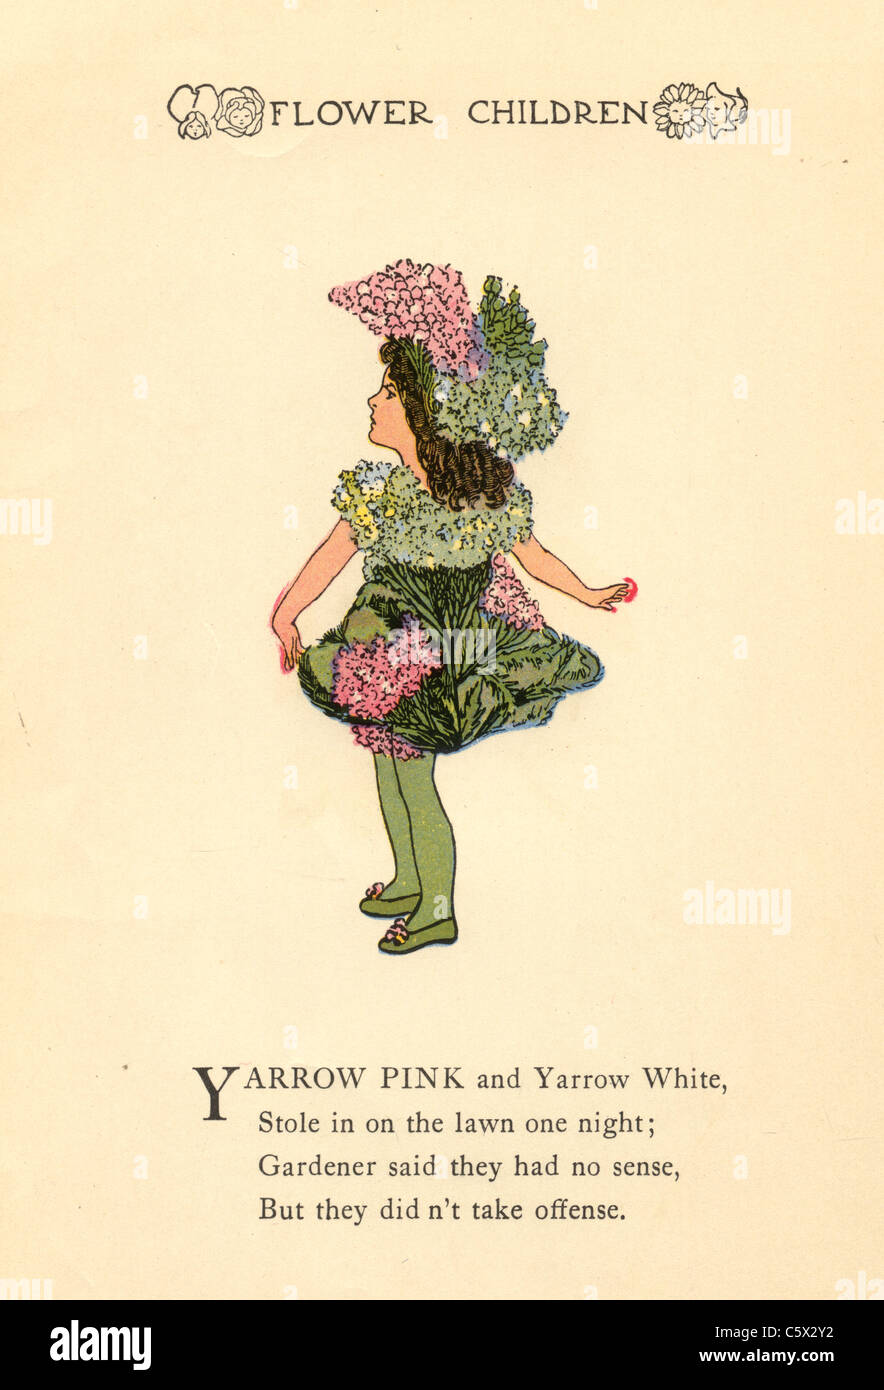 Yarrow - Flower Child Illustration from an antiquarian book Stock Photo